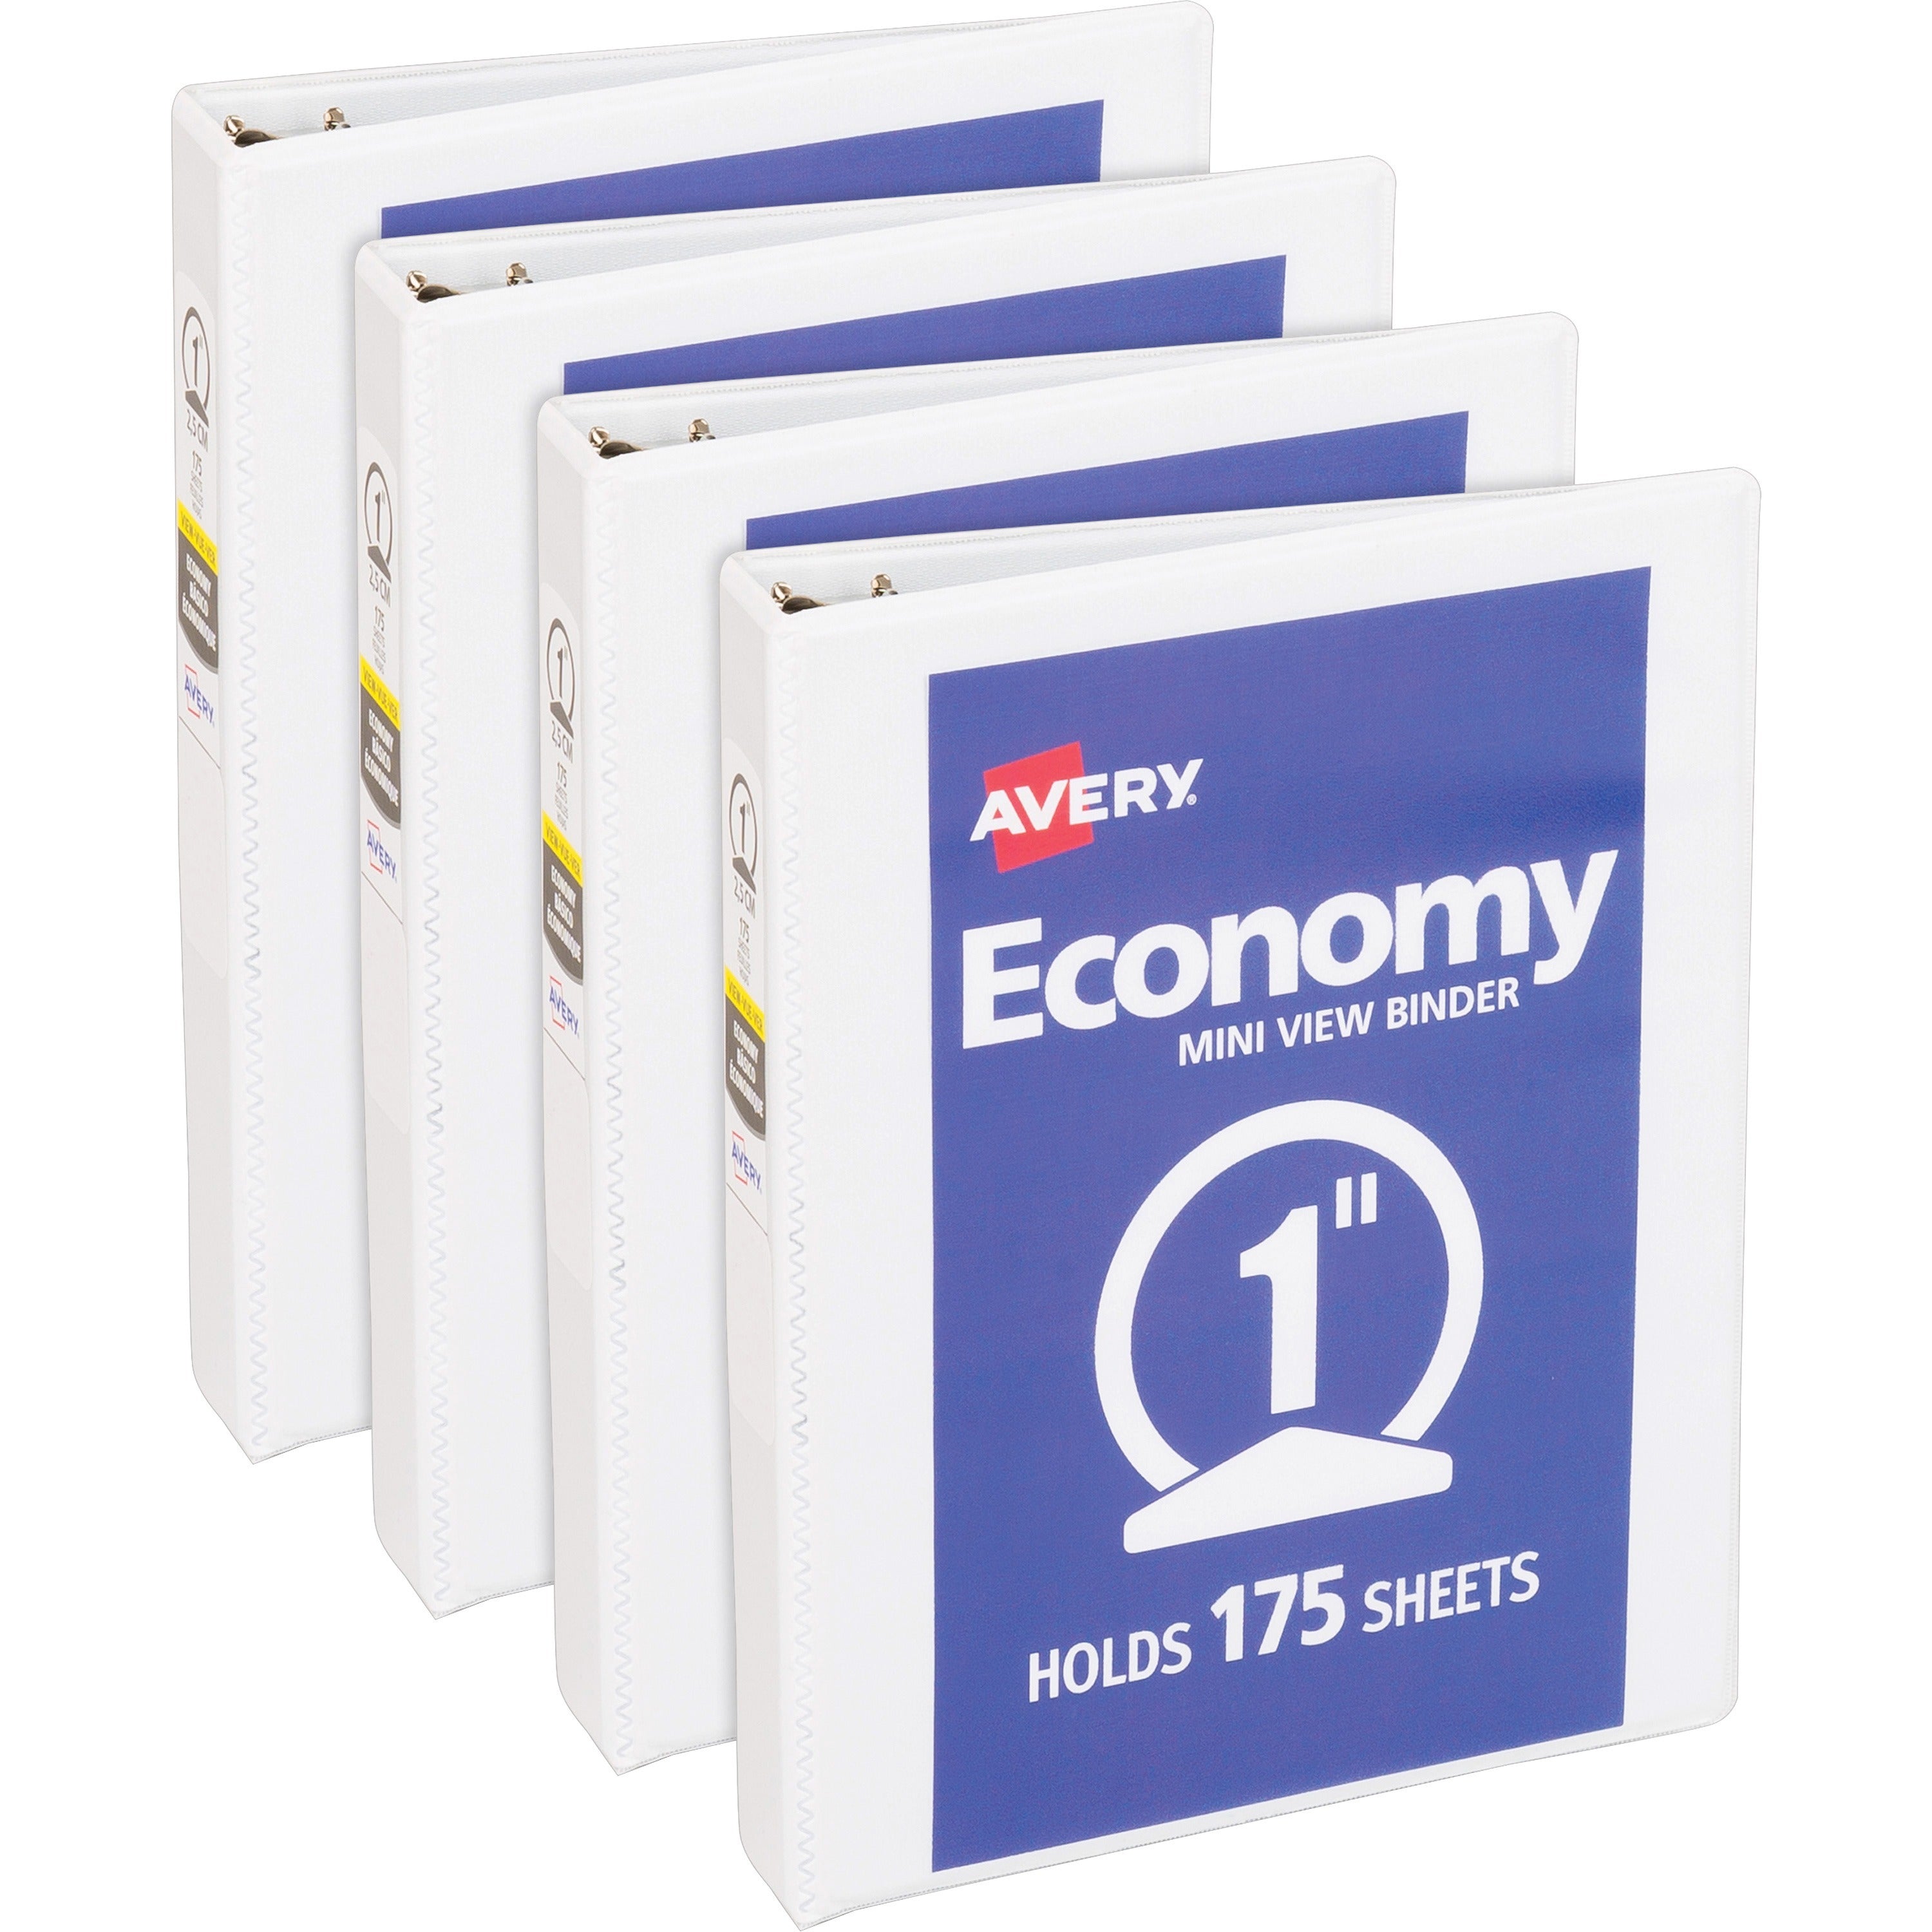 avery-economy-view-binder_ave05806bd - 1